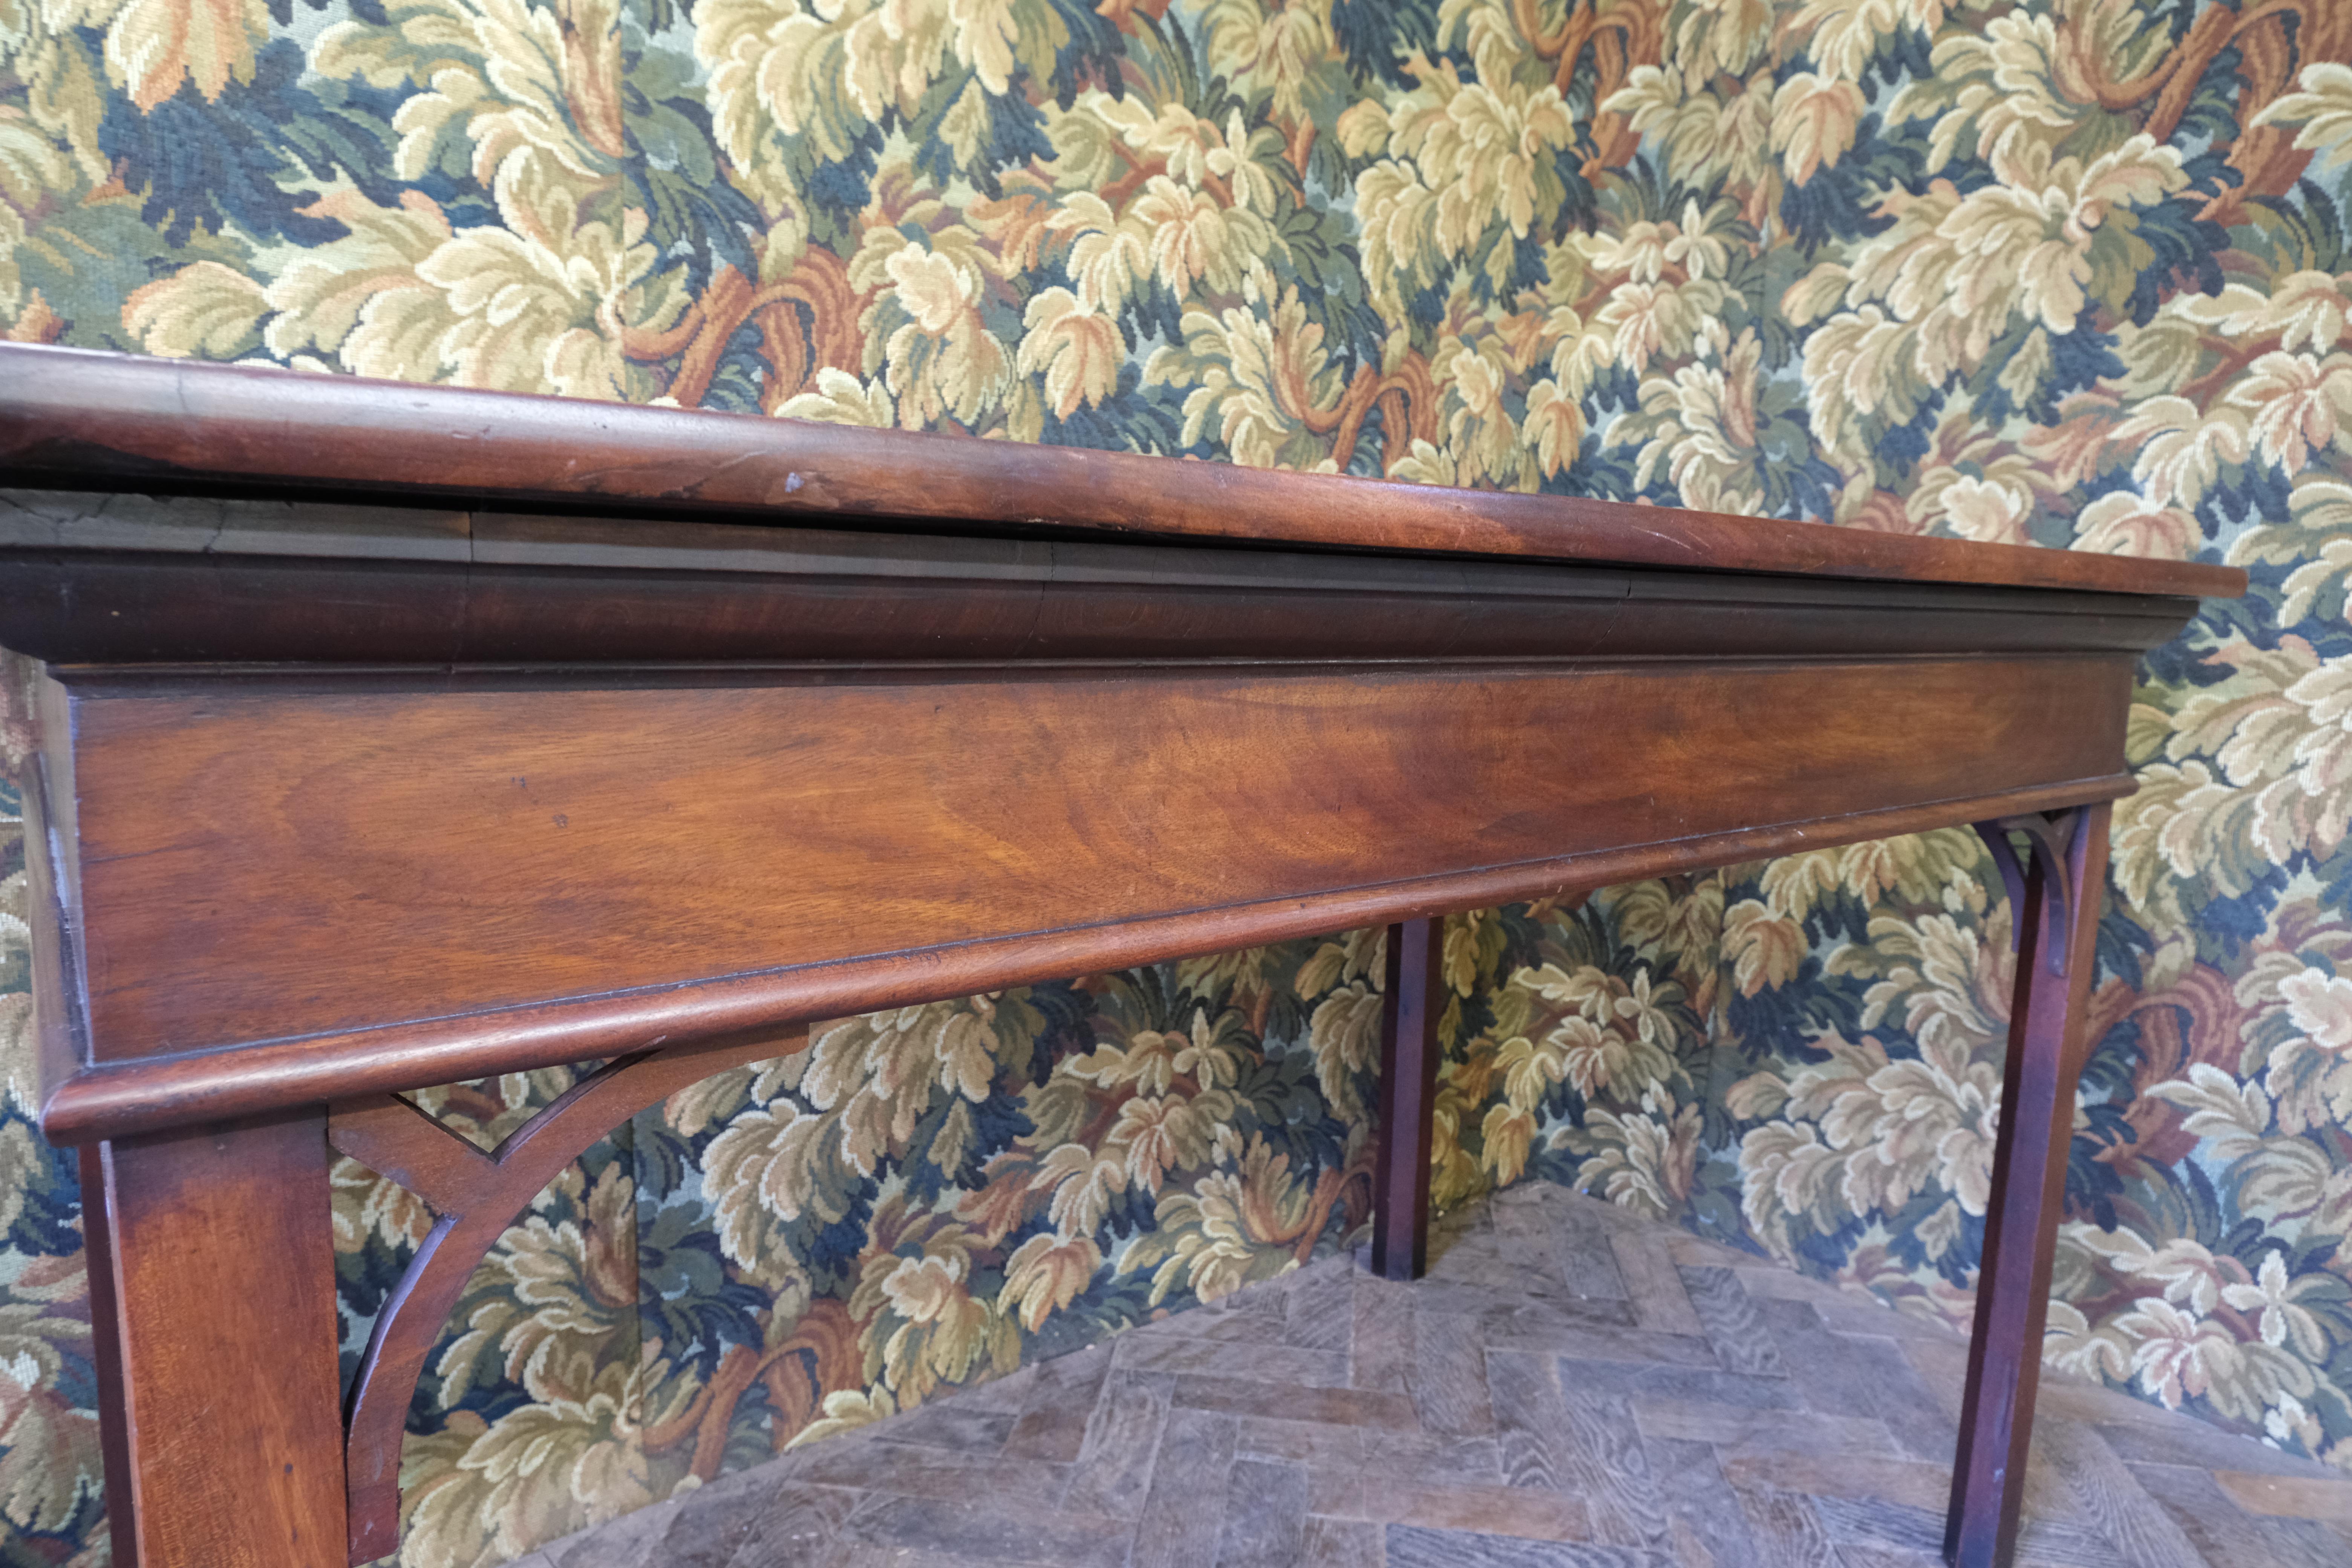 Hutton-Clarke Antiques proudly presents a distinguished Chippendale period centre table from a country house, dating back to circa 1760. This exquisite piece is designed to be admired from any angle, featuring a freestanding construction that is